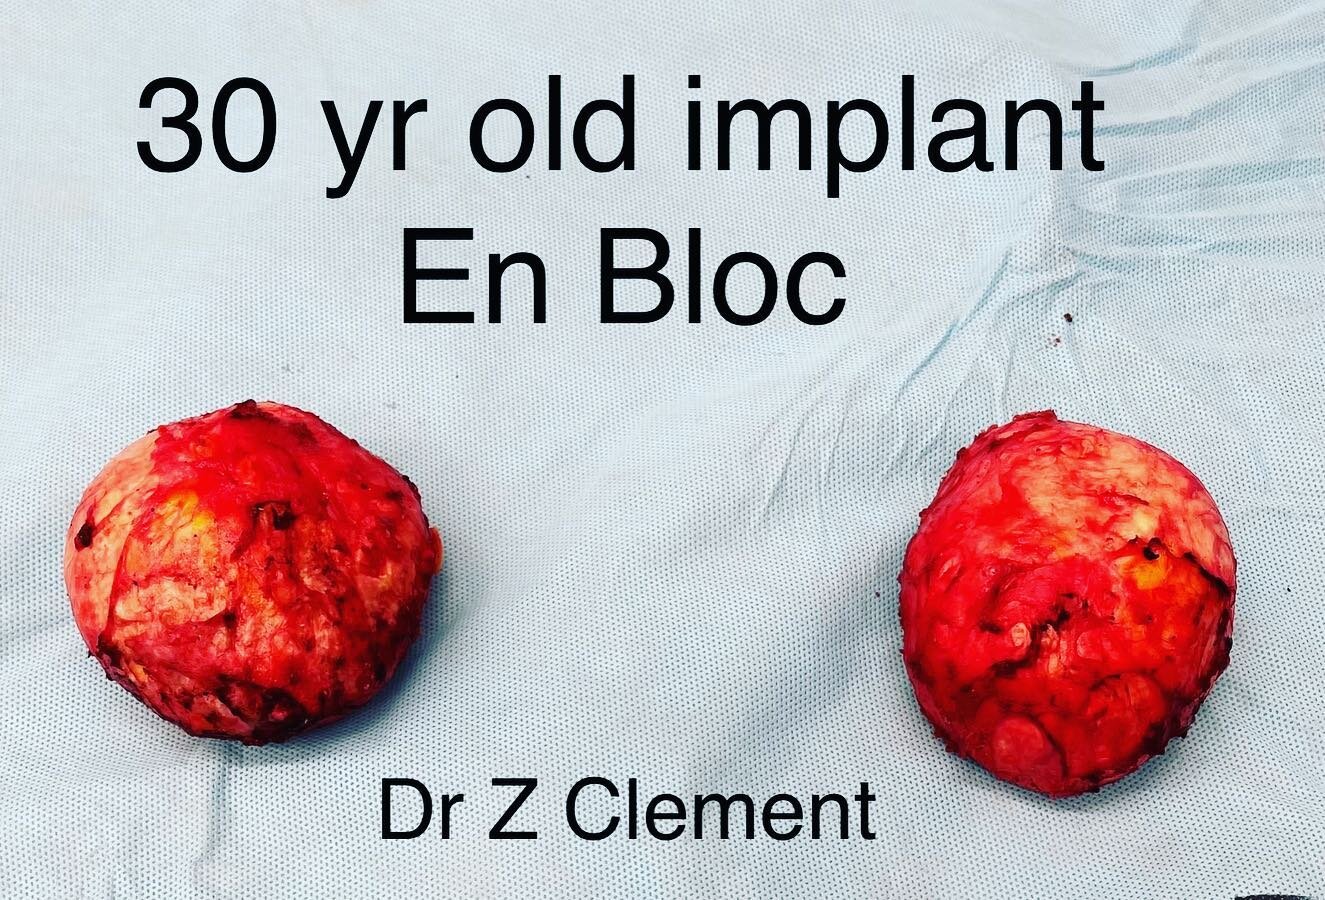 30 year old rock hard calcified ruptured implants! 
Get your implants checked.. they are not life time devices!

#breastimplant #rupturedbreastimplants #capsularcontracture #enbloc #enbloccapsulecotmy #explant #breasthealth #explantsurgery #getyourim